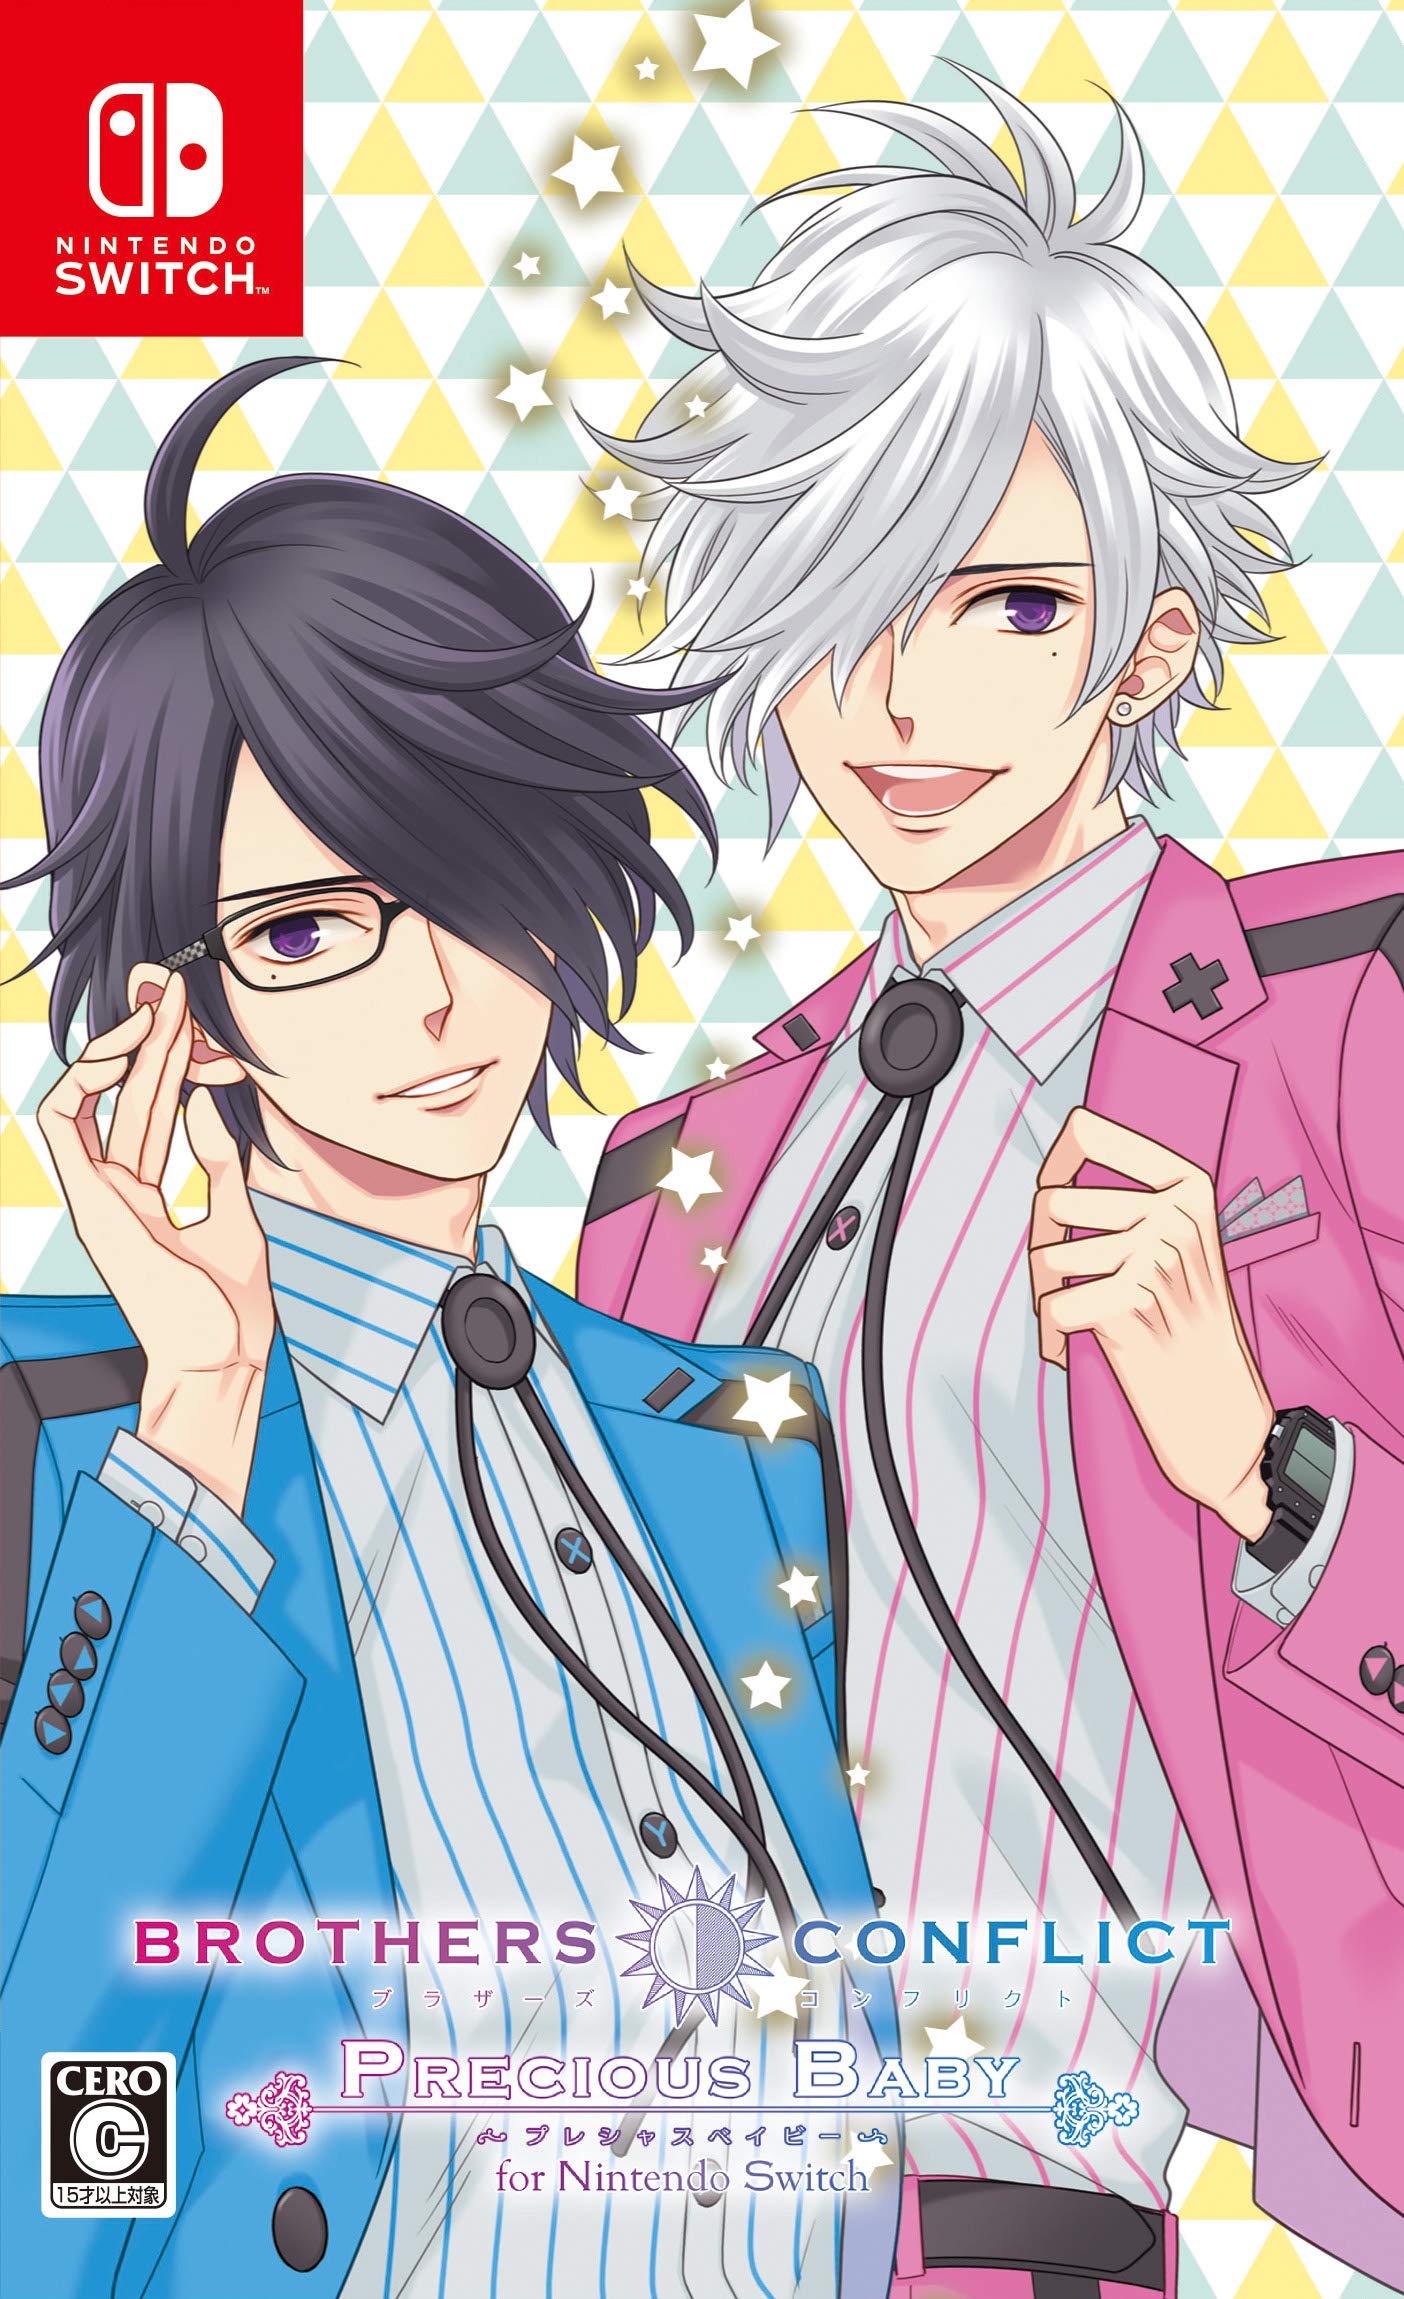 BROTHERS CONFLICT Precious Baby for Nintendo Switch画像